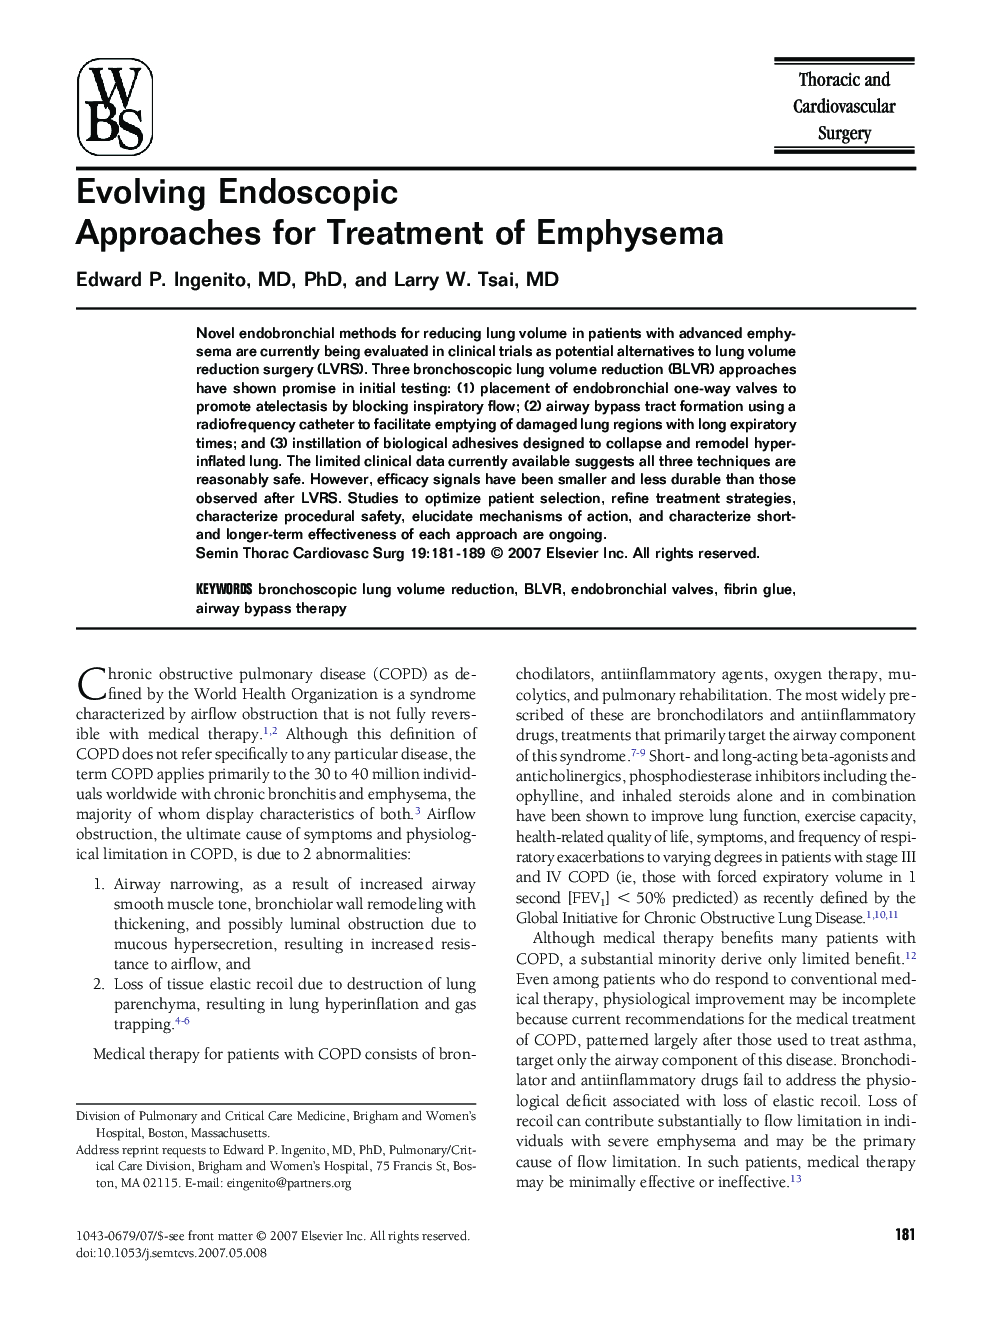 Evolving Endoscopic Approaches for Treatment of Emphysema